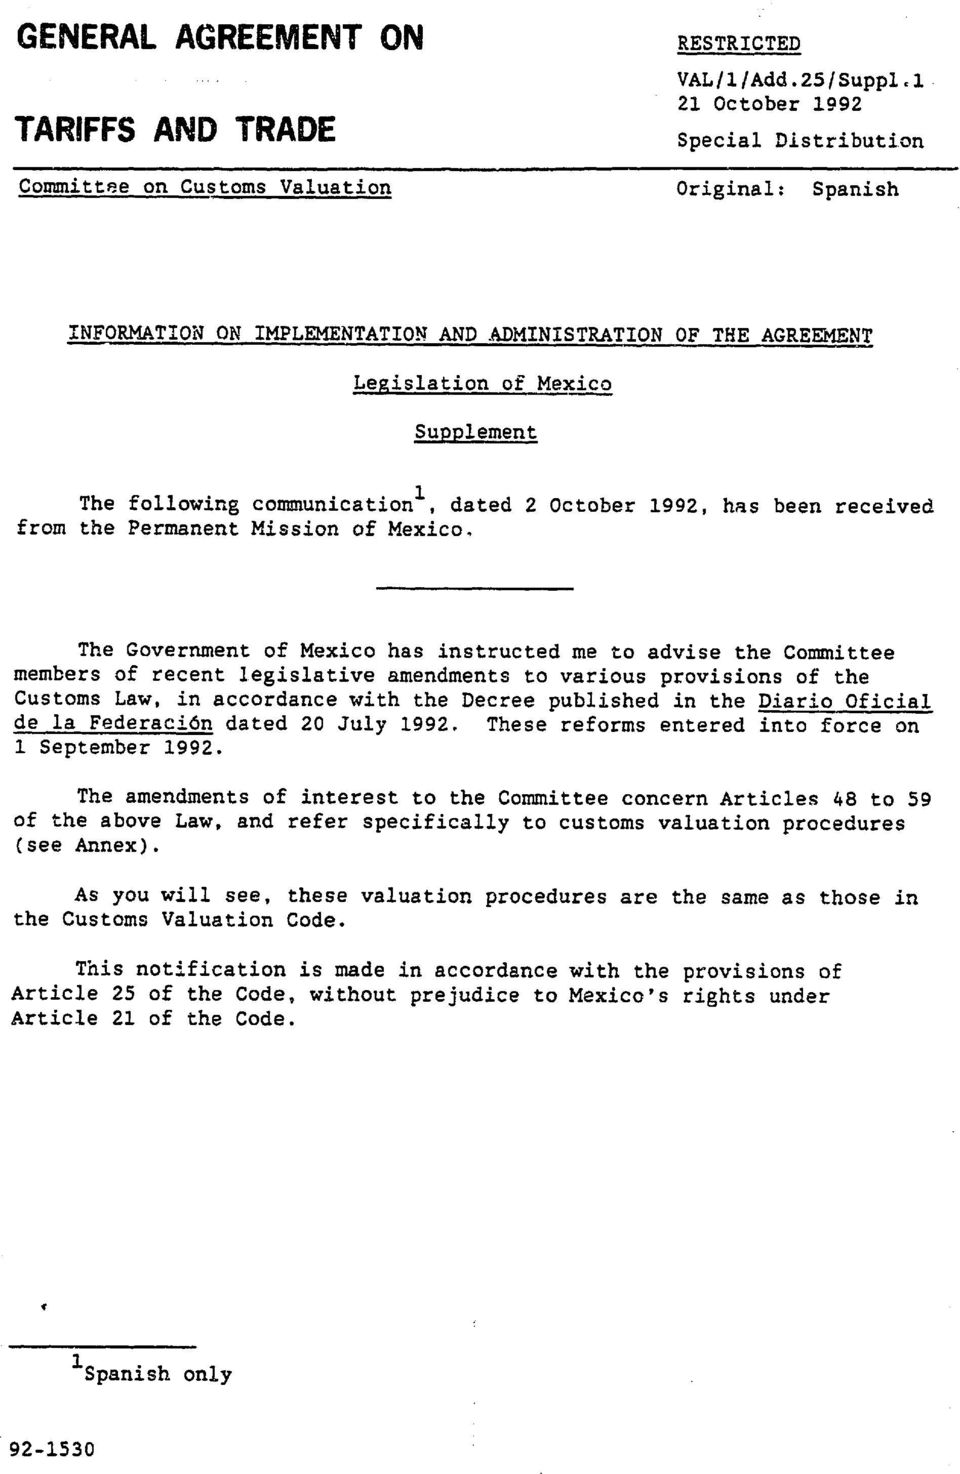 following communication1, dated 2 October 1992, has been received from the Permanent Mission of Mexico.